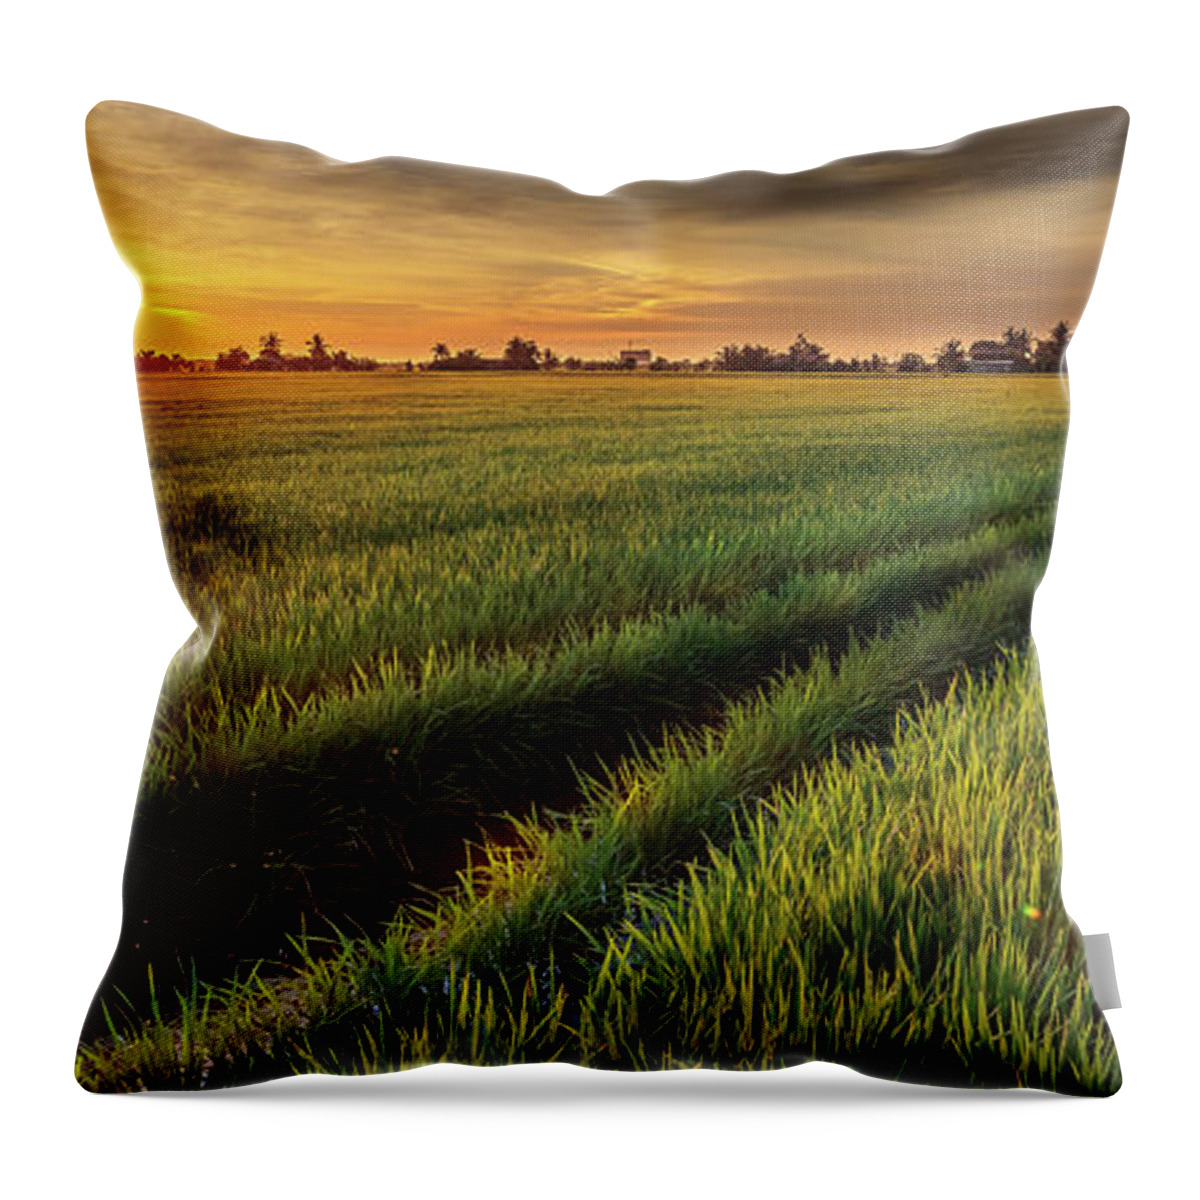 Tranquility Throw Pillow featuring the photograph Rice Production In Thailand by Simonlong